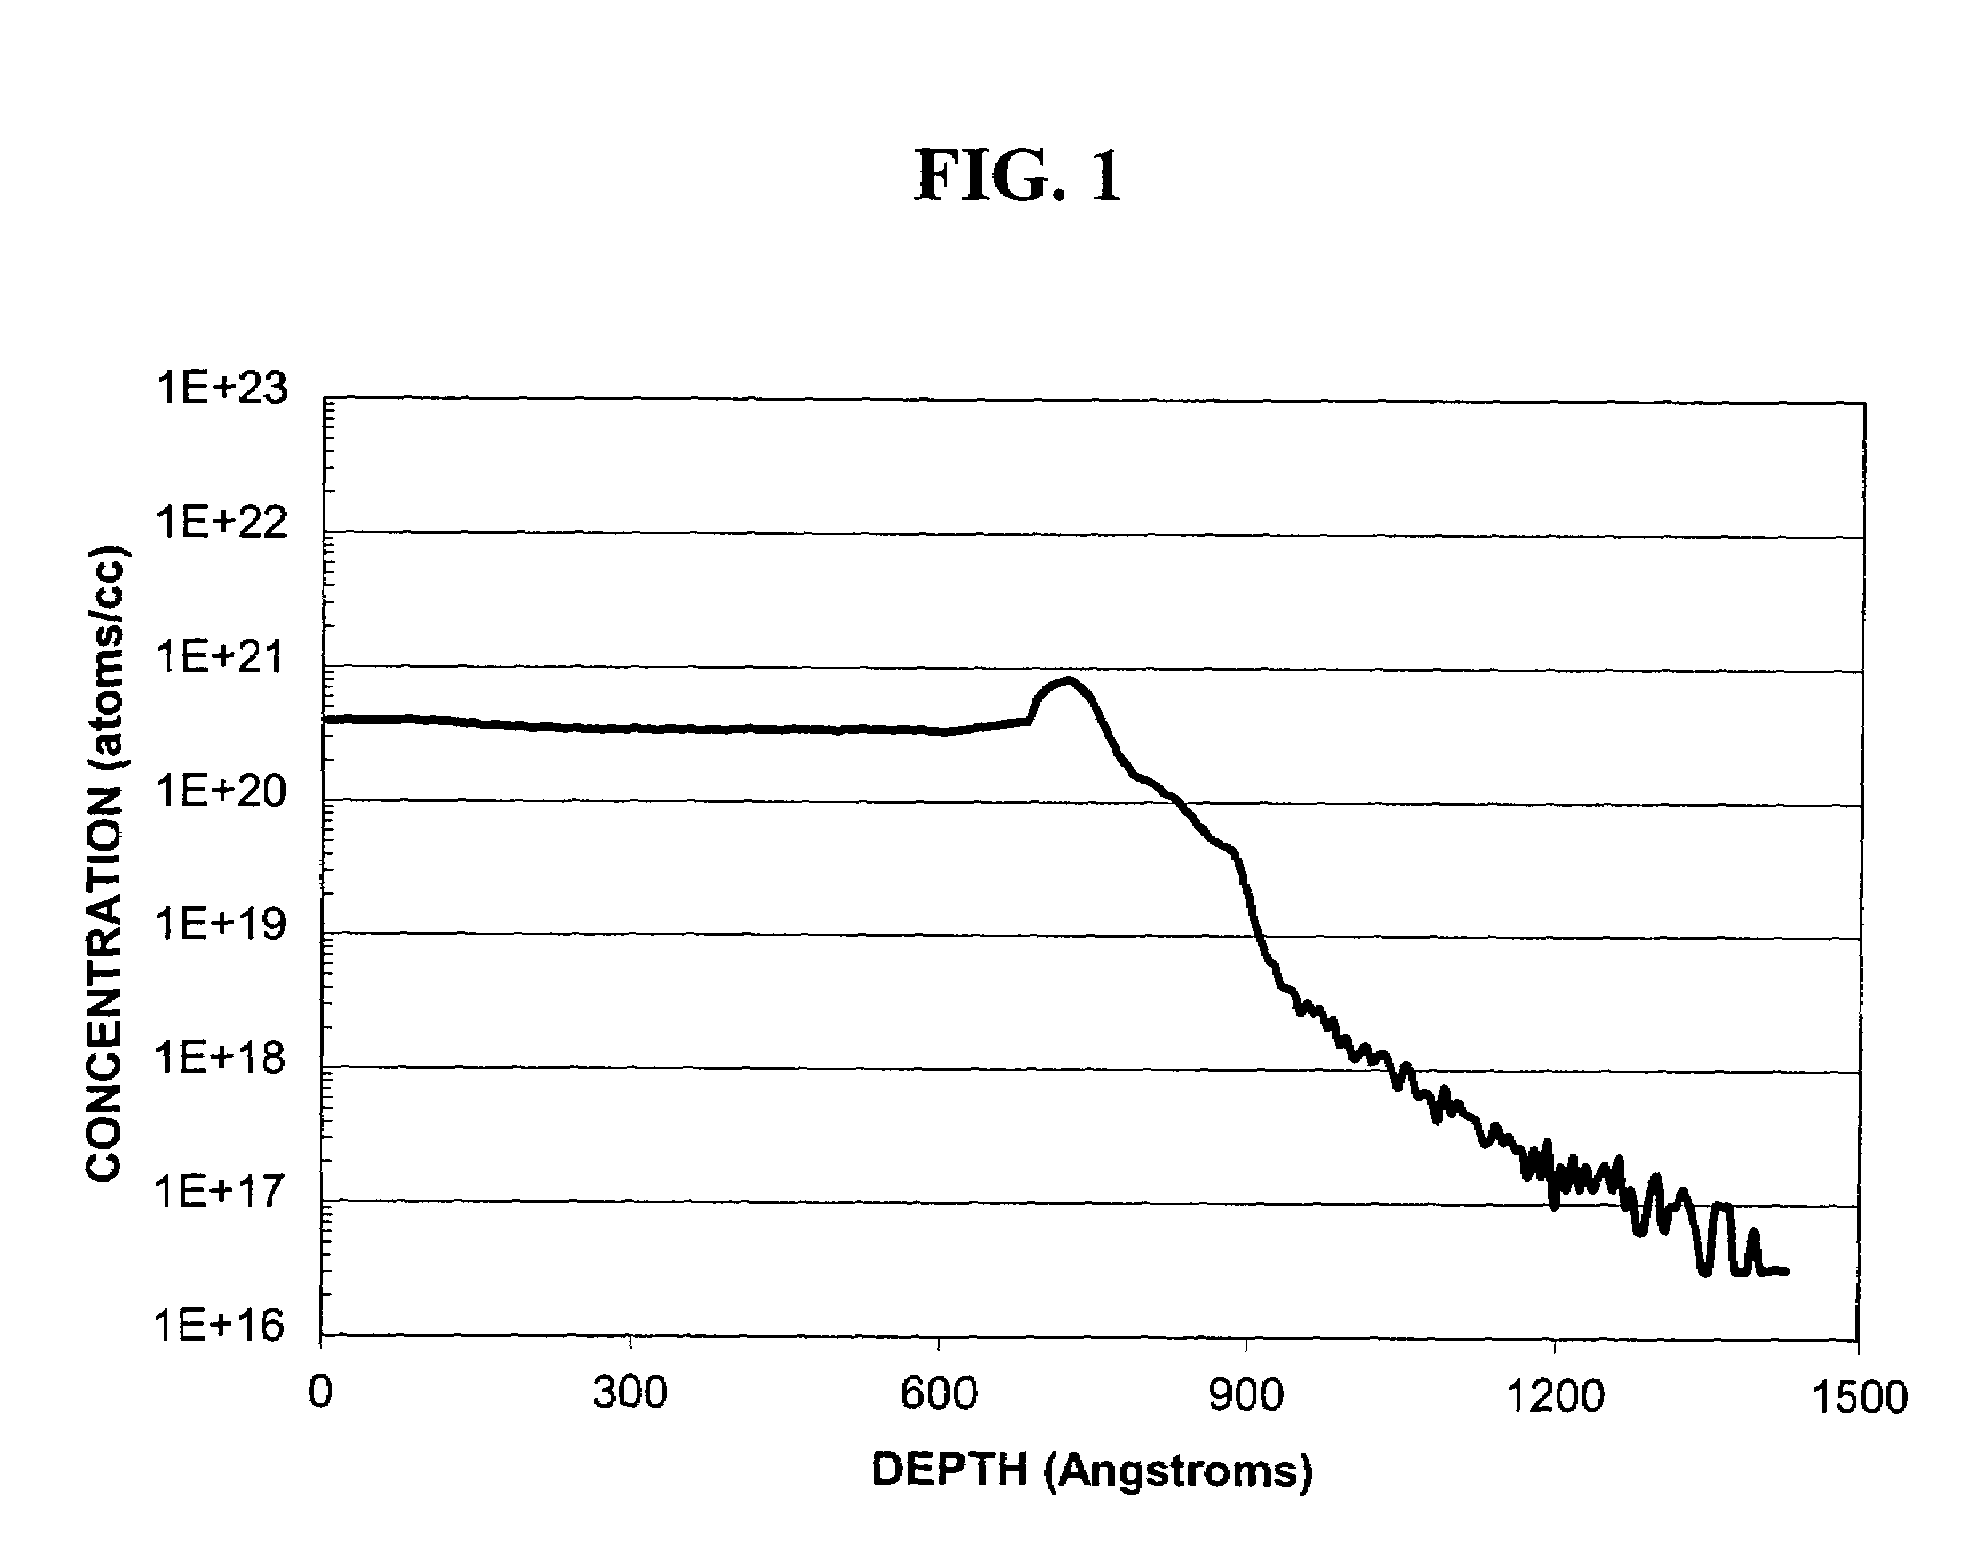 Methods of forming a doped semiconductor thin film, doped semiconductor thin film structures, doped silane compositions, and methods of making such compositions